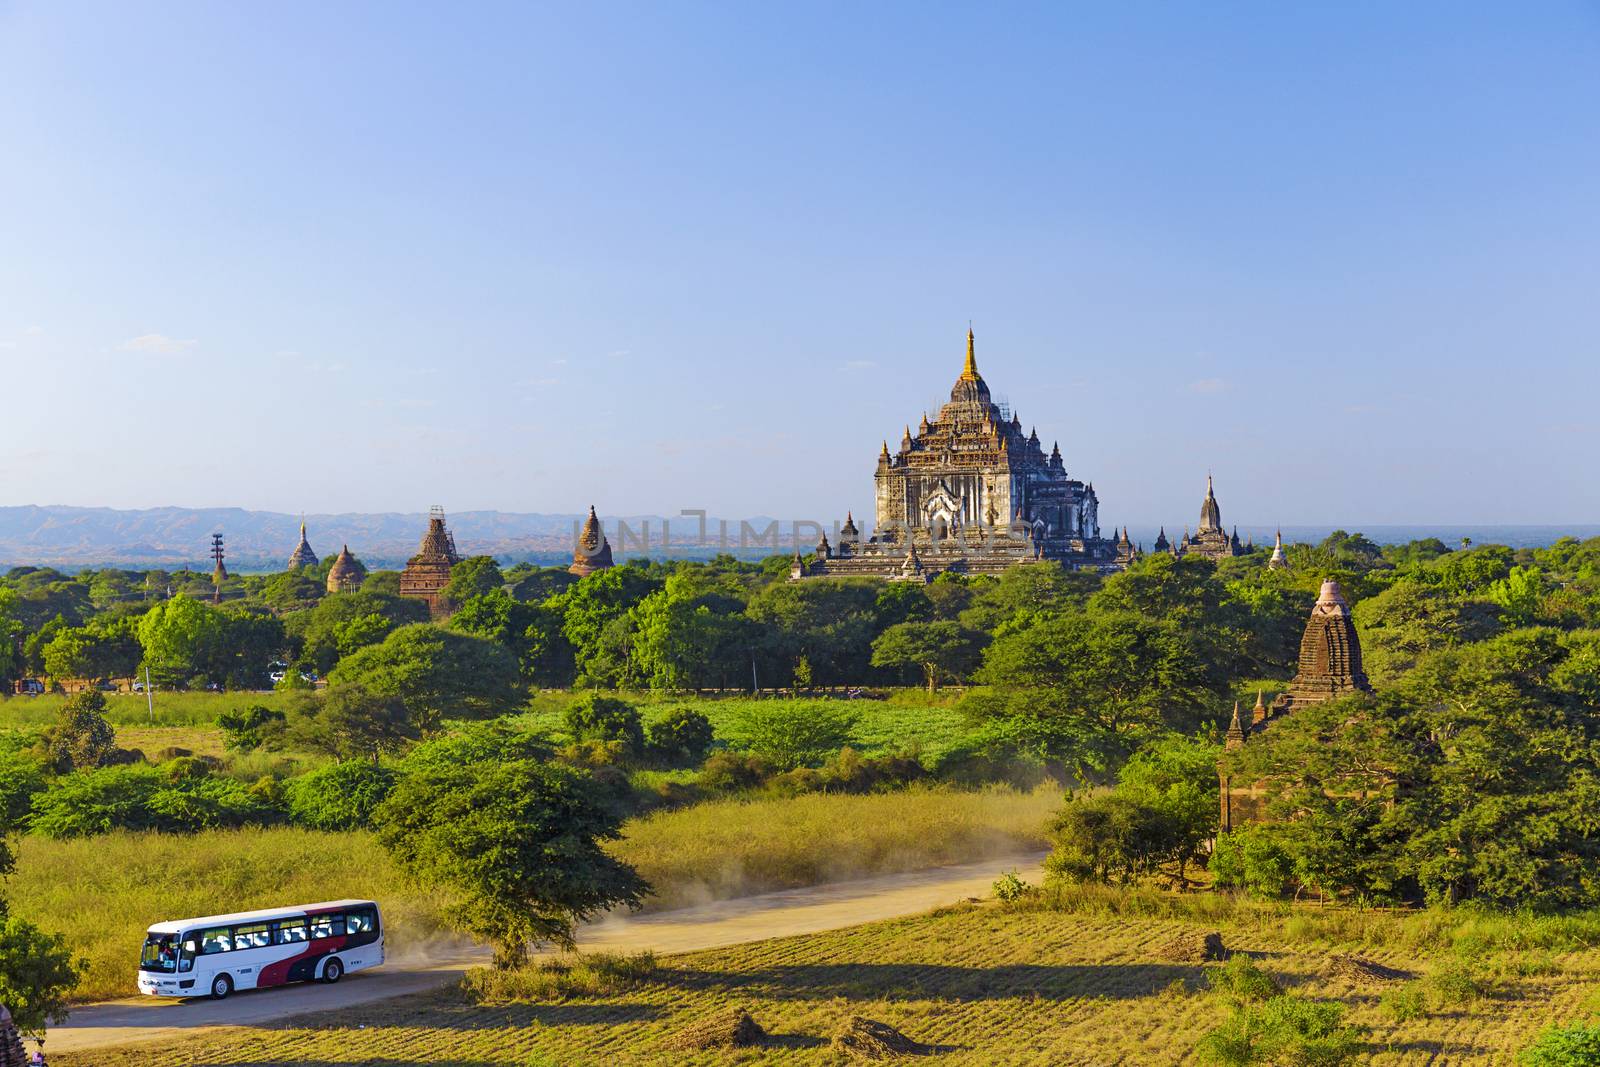 Bagan buddha tower at day , famous place in Myanmar/ Burma